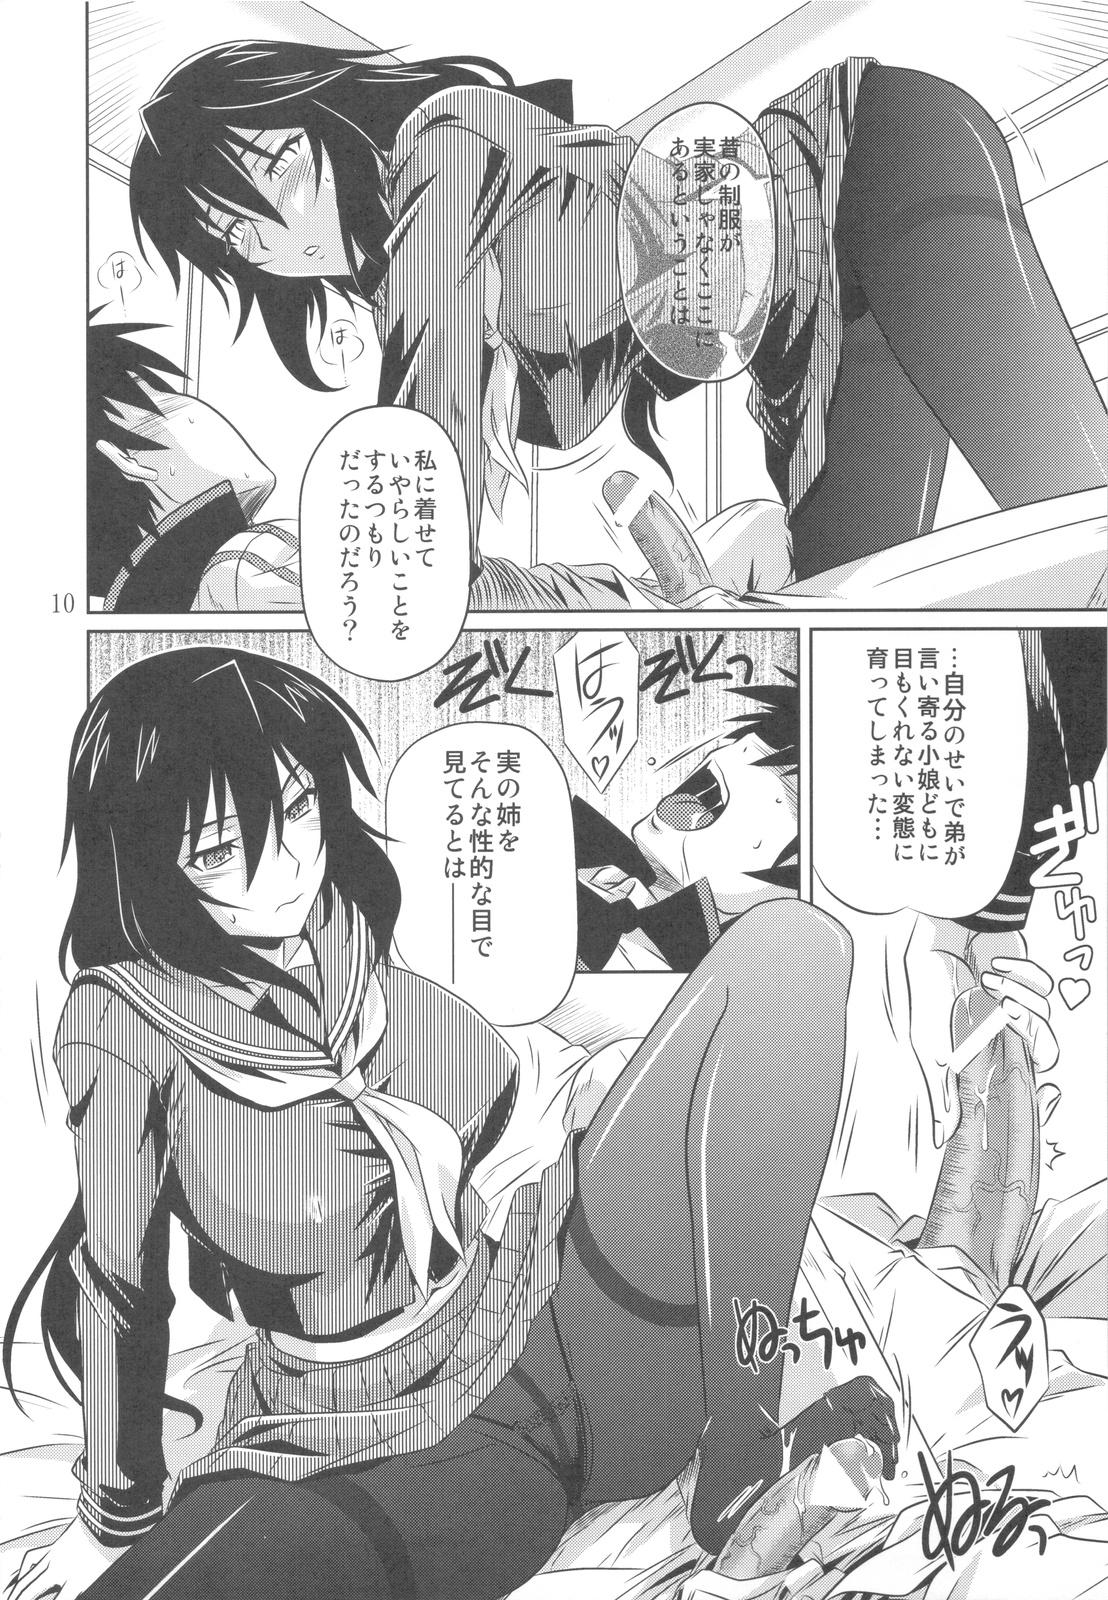 Pegging is Incest Strategy 2 - Infinite stratos Stepsister - Page 10